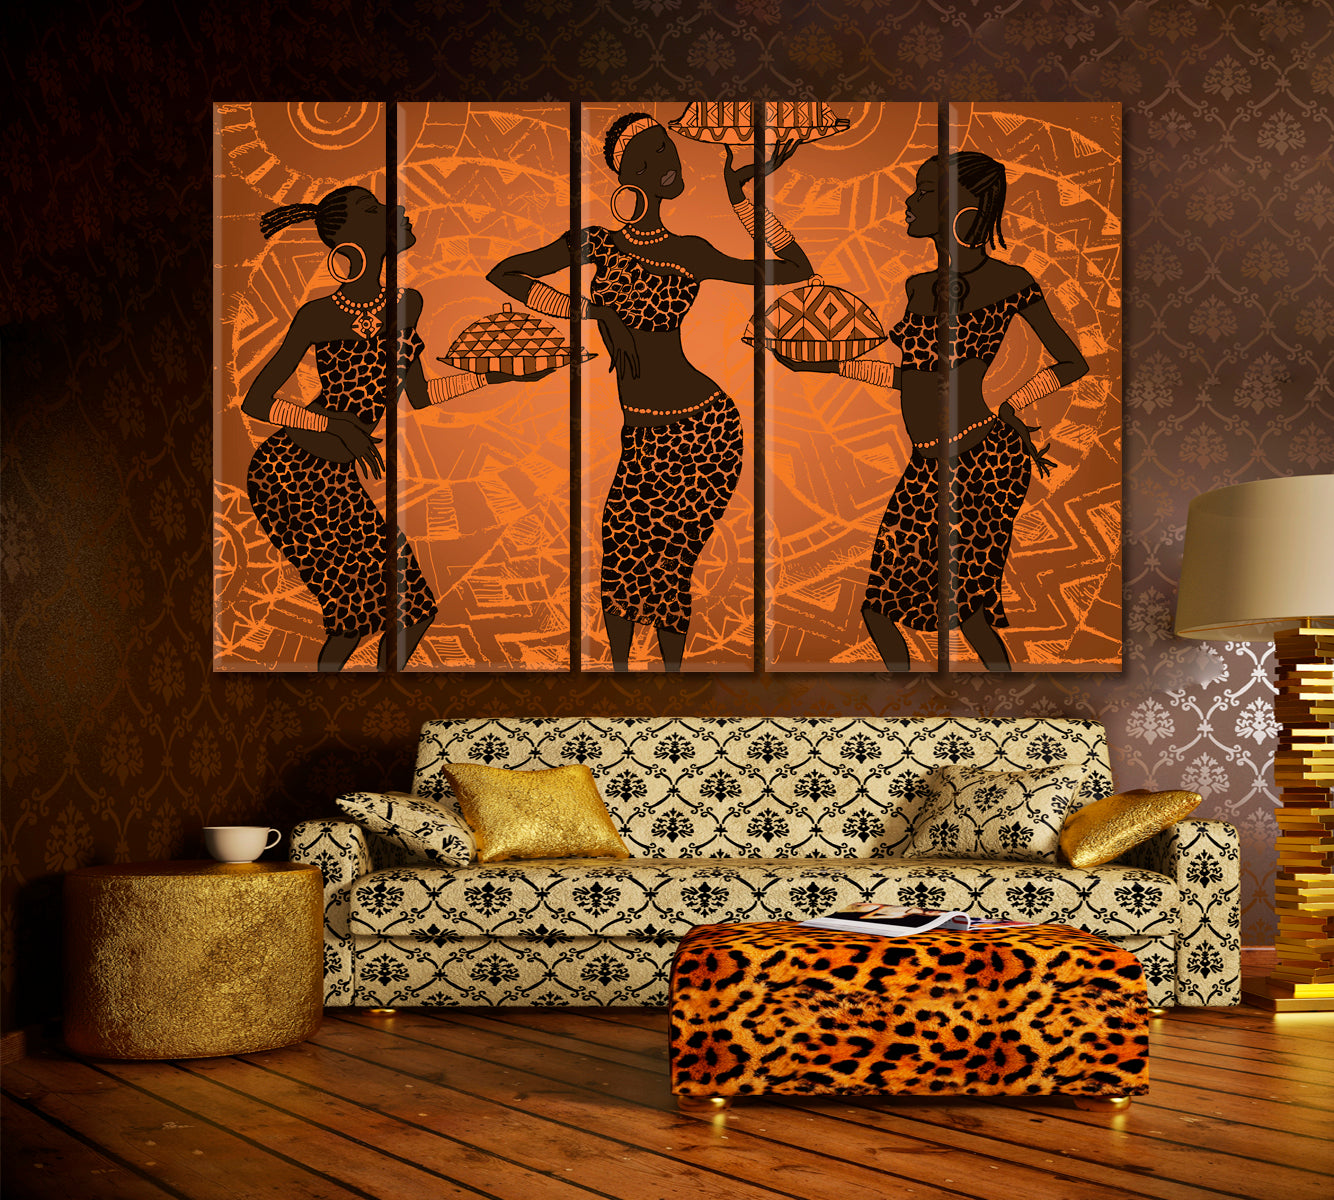 Beautiful African Black Woman Africa Ethnic Retro Vintage Art African Style Canvas Print Artesty 5 panels 36" x 24" 